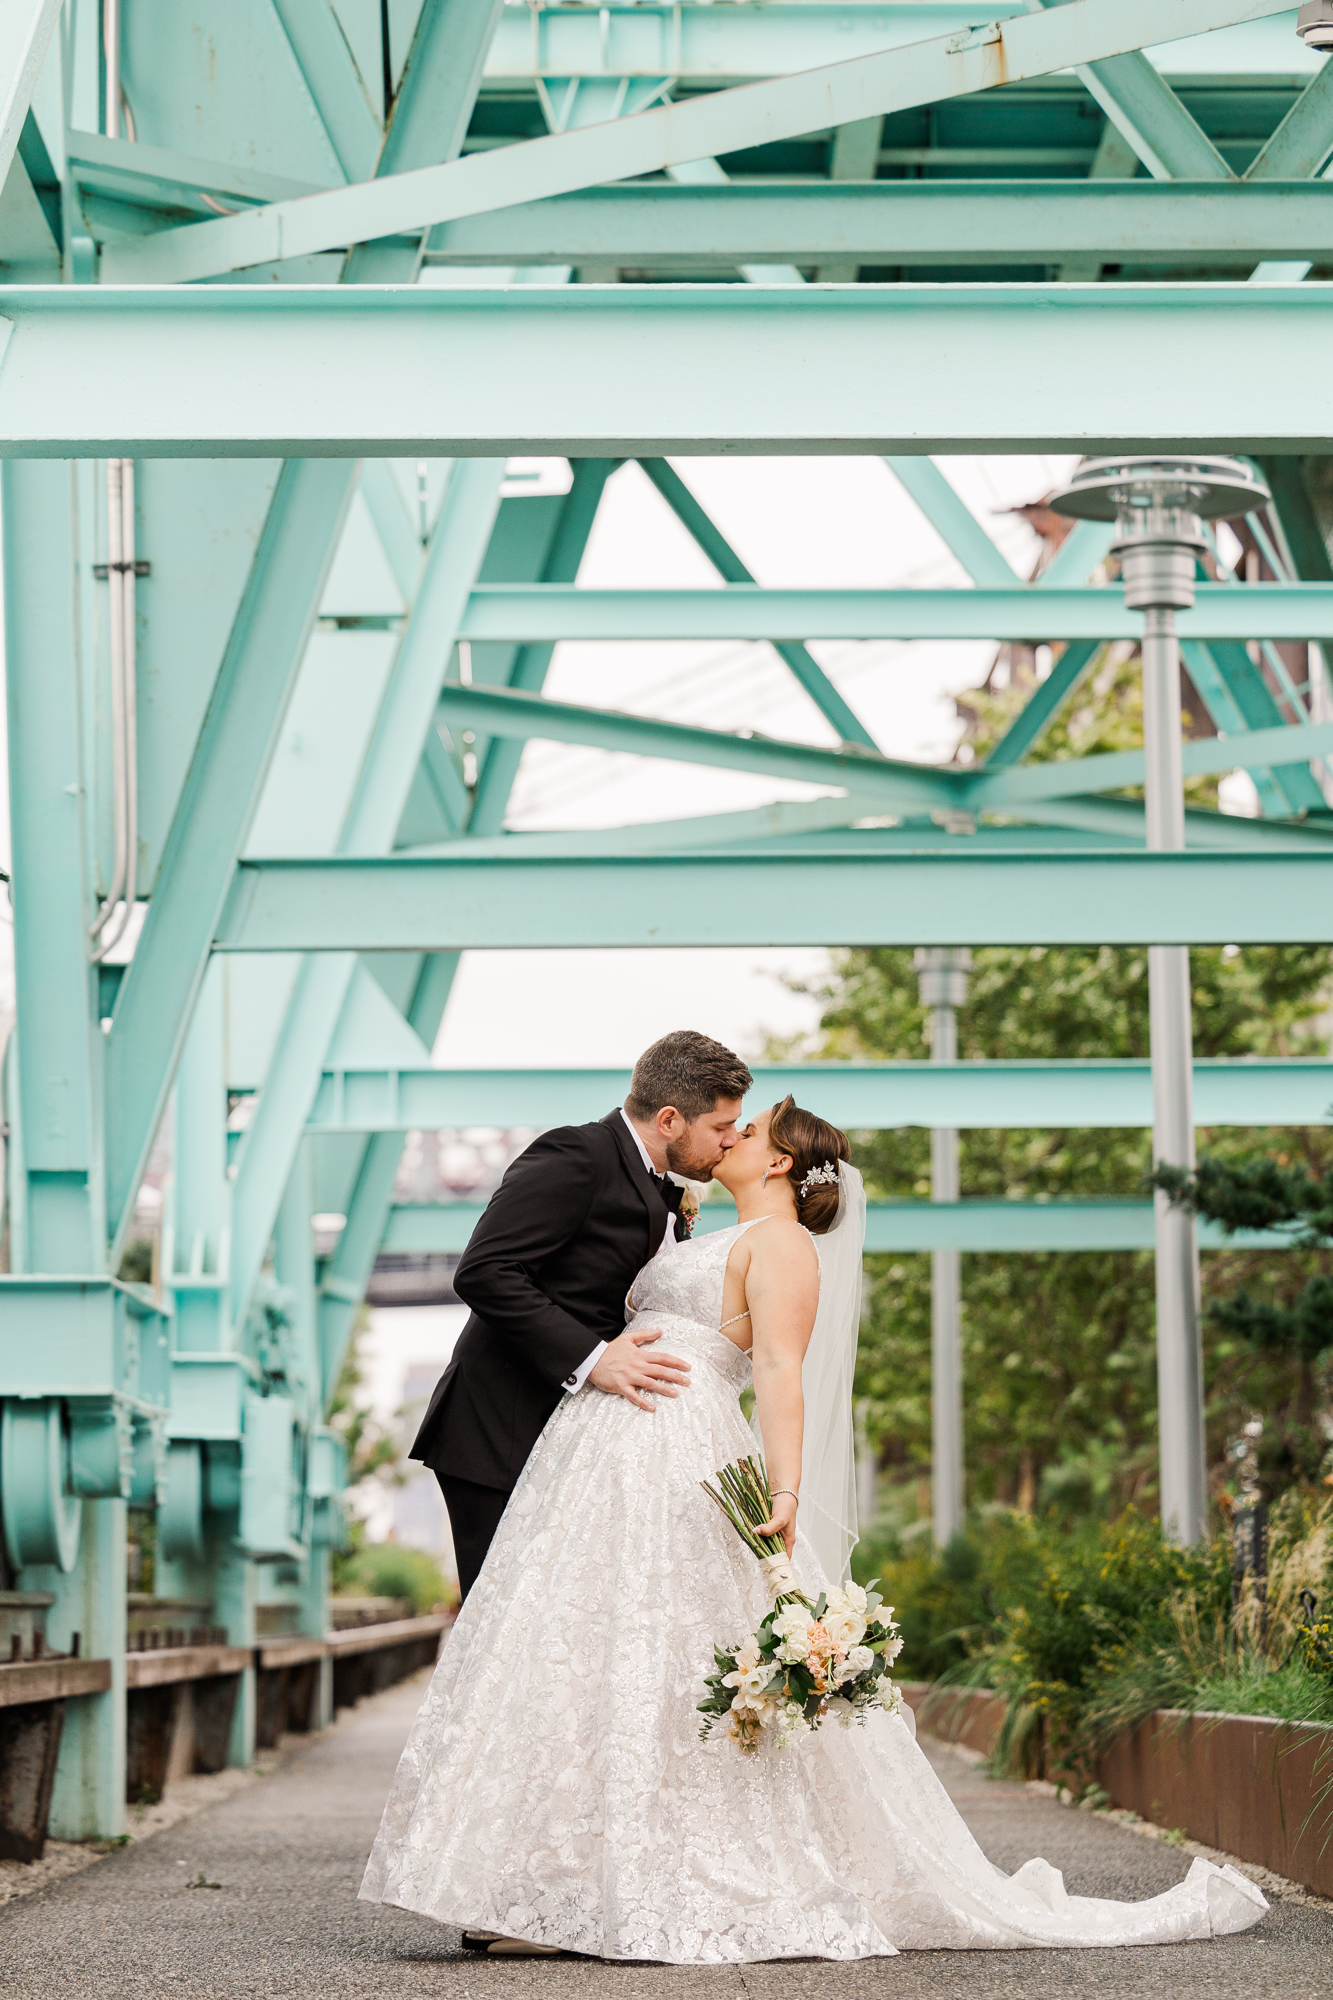 Perfect New York Wedding at Giando On The Water